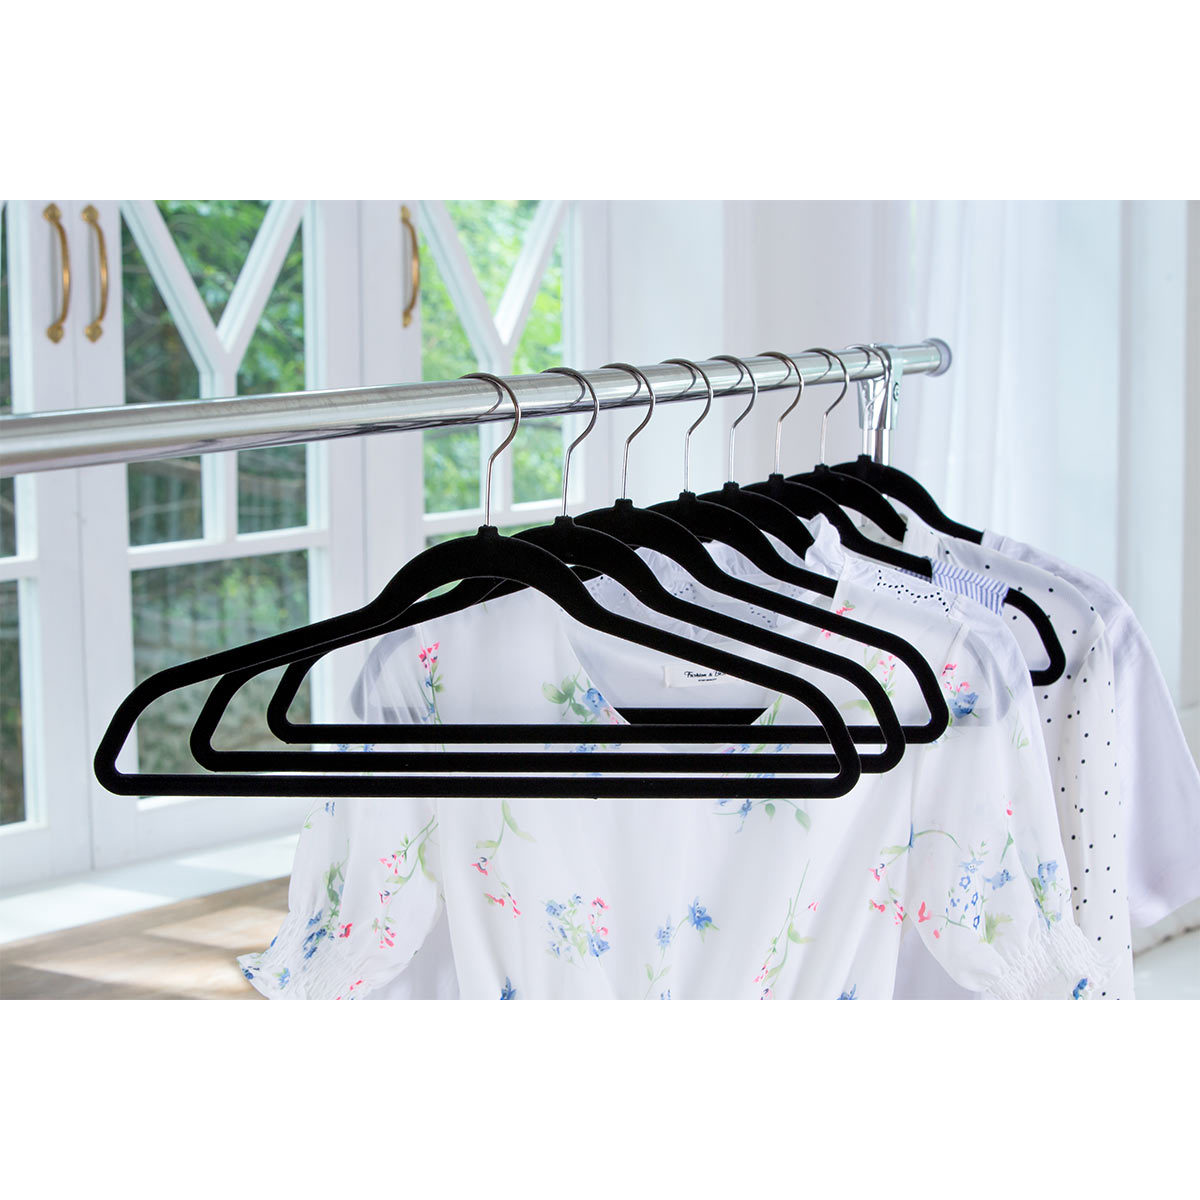 Hangers with white clothes on on a silver rail